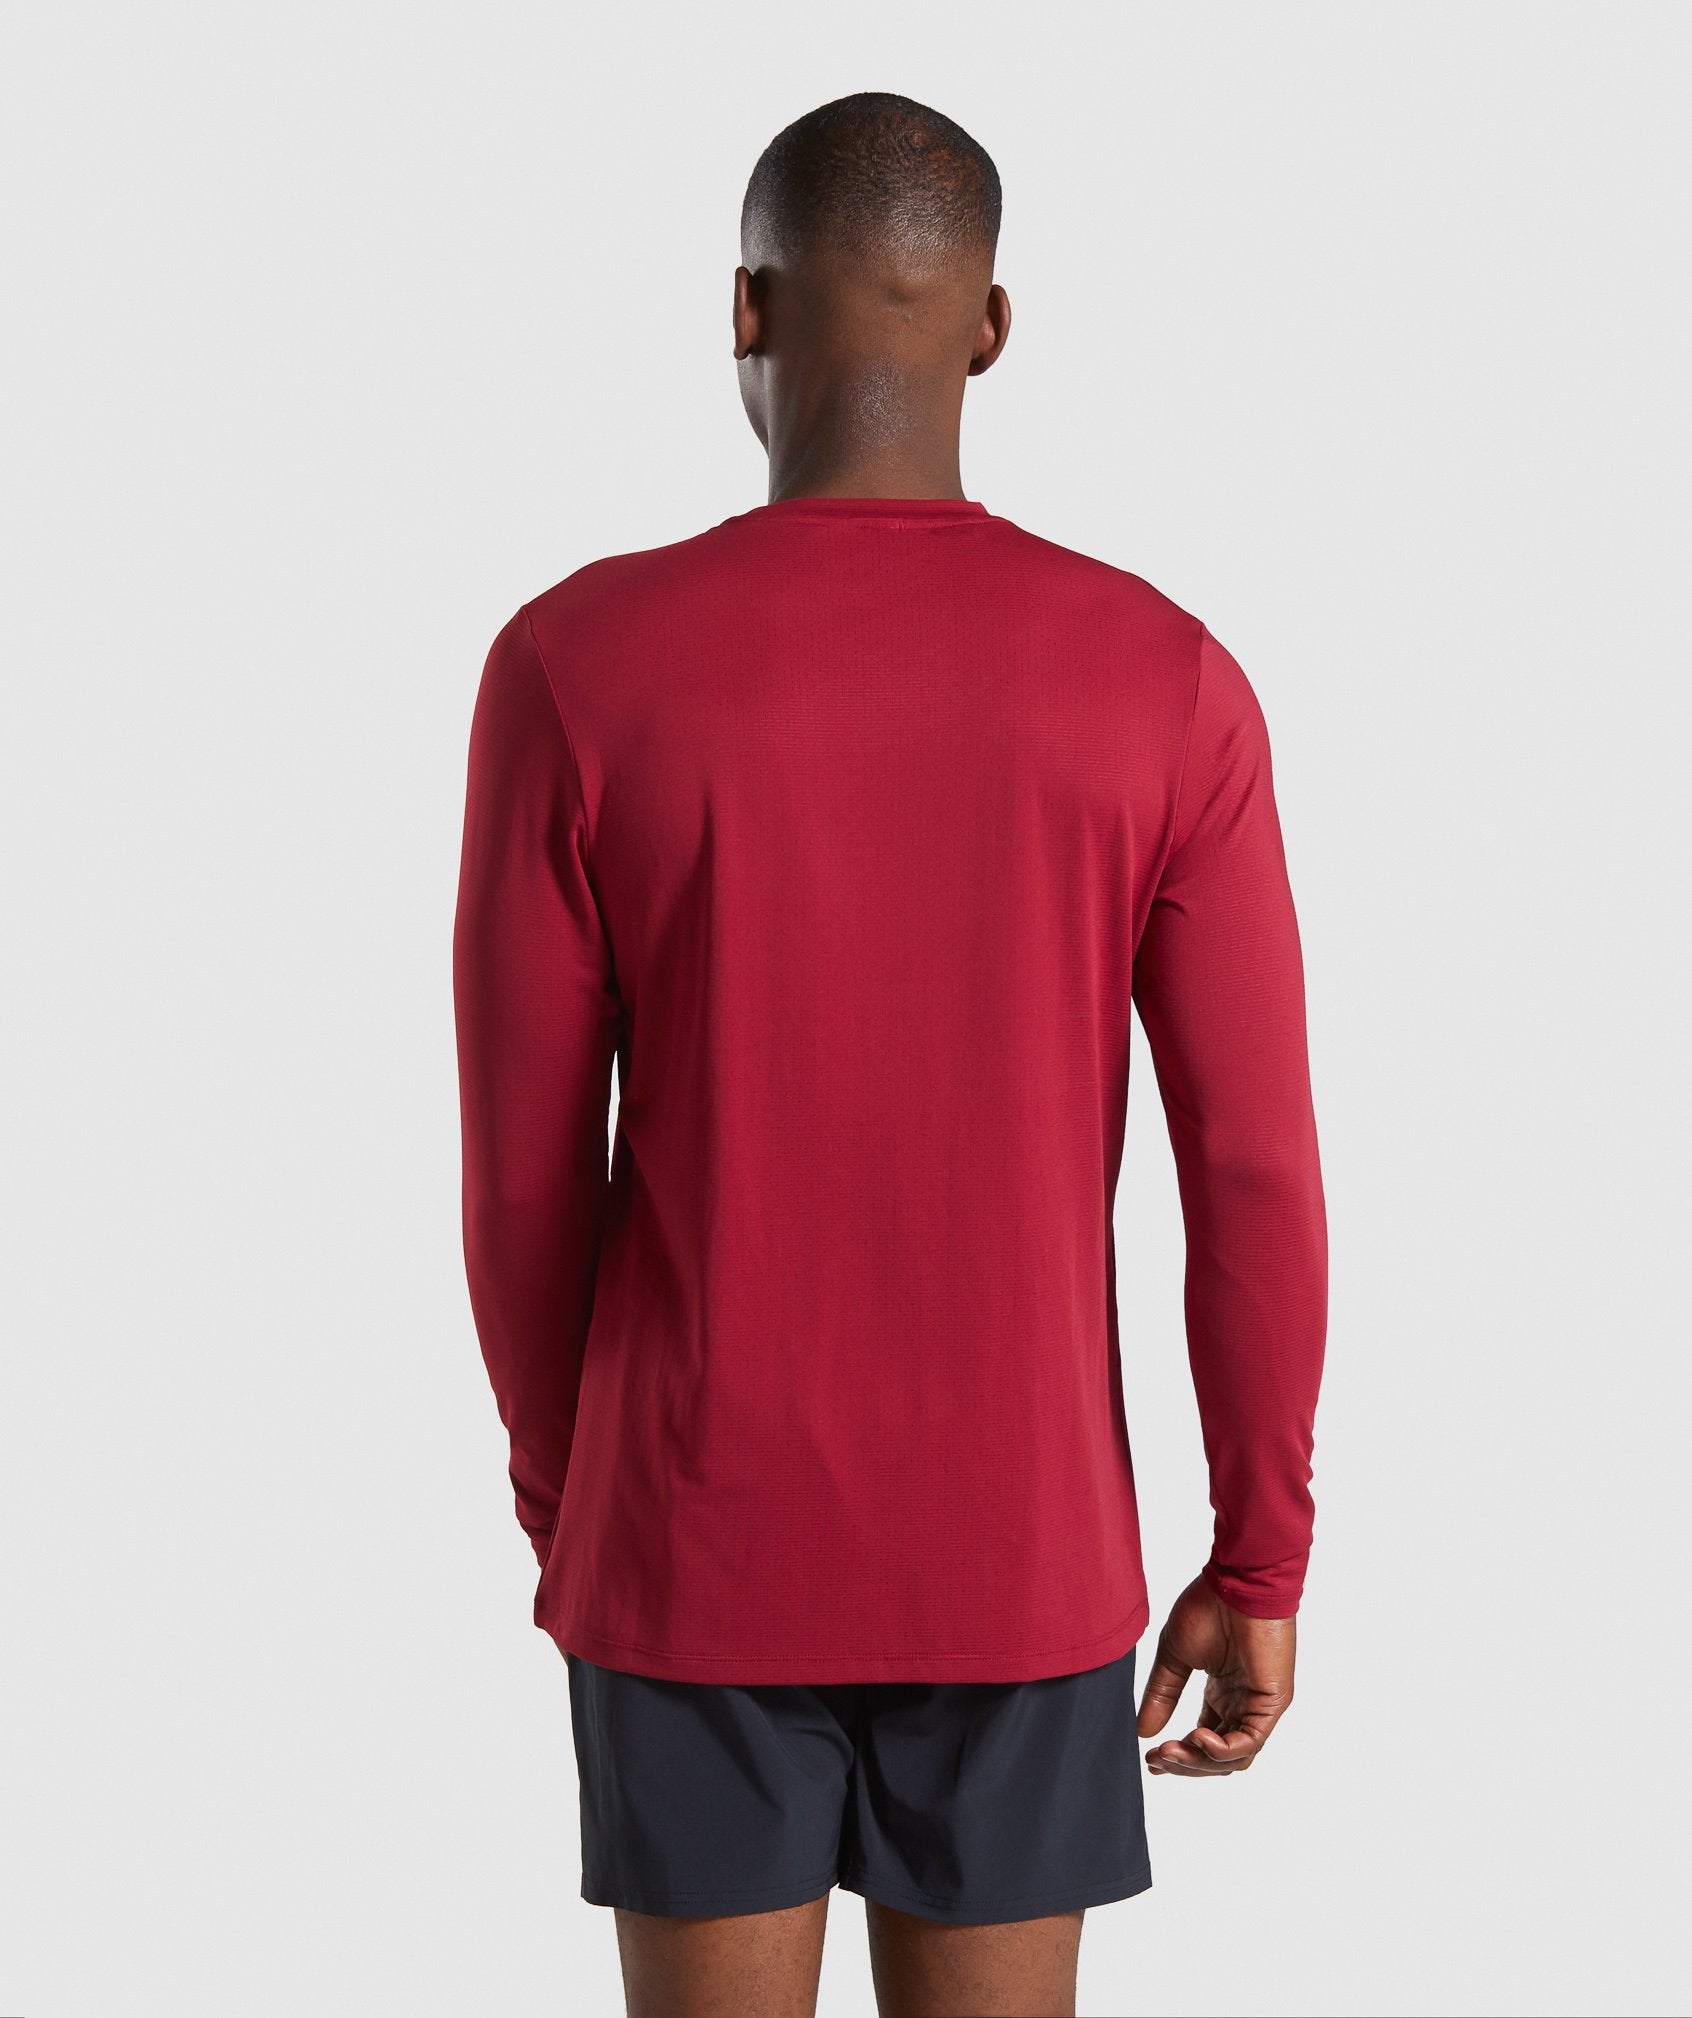 Arrival Long Sleeve T-Shirt in Claret - view 2